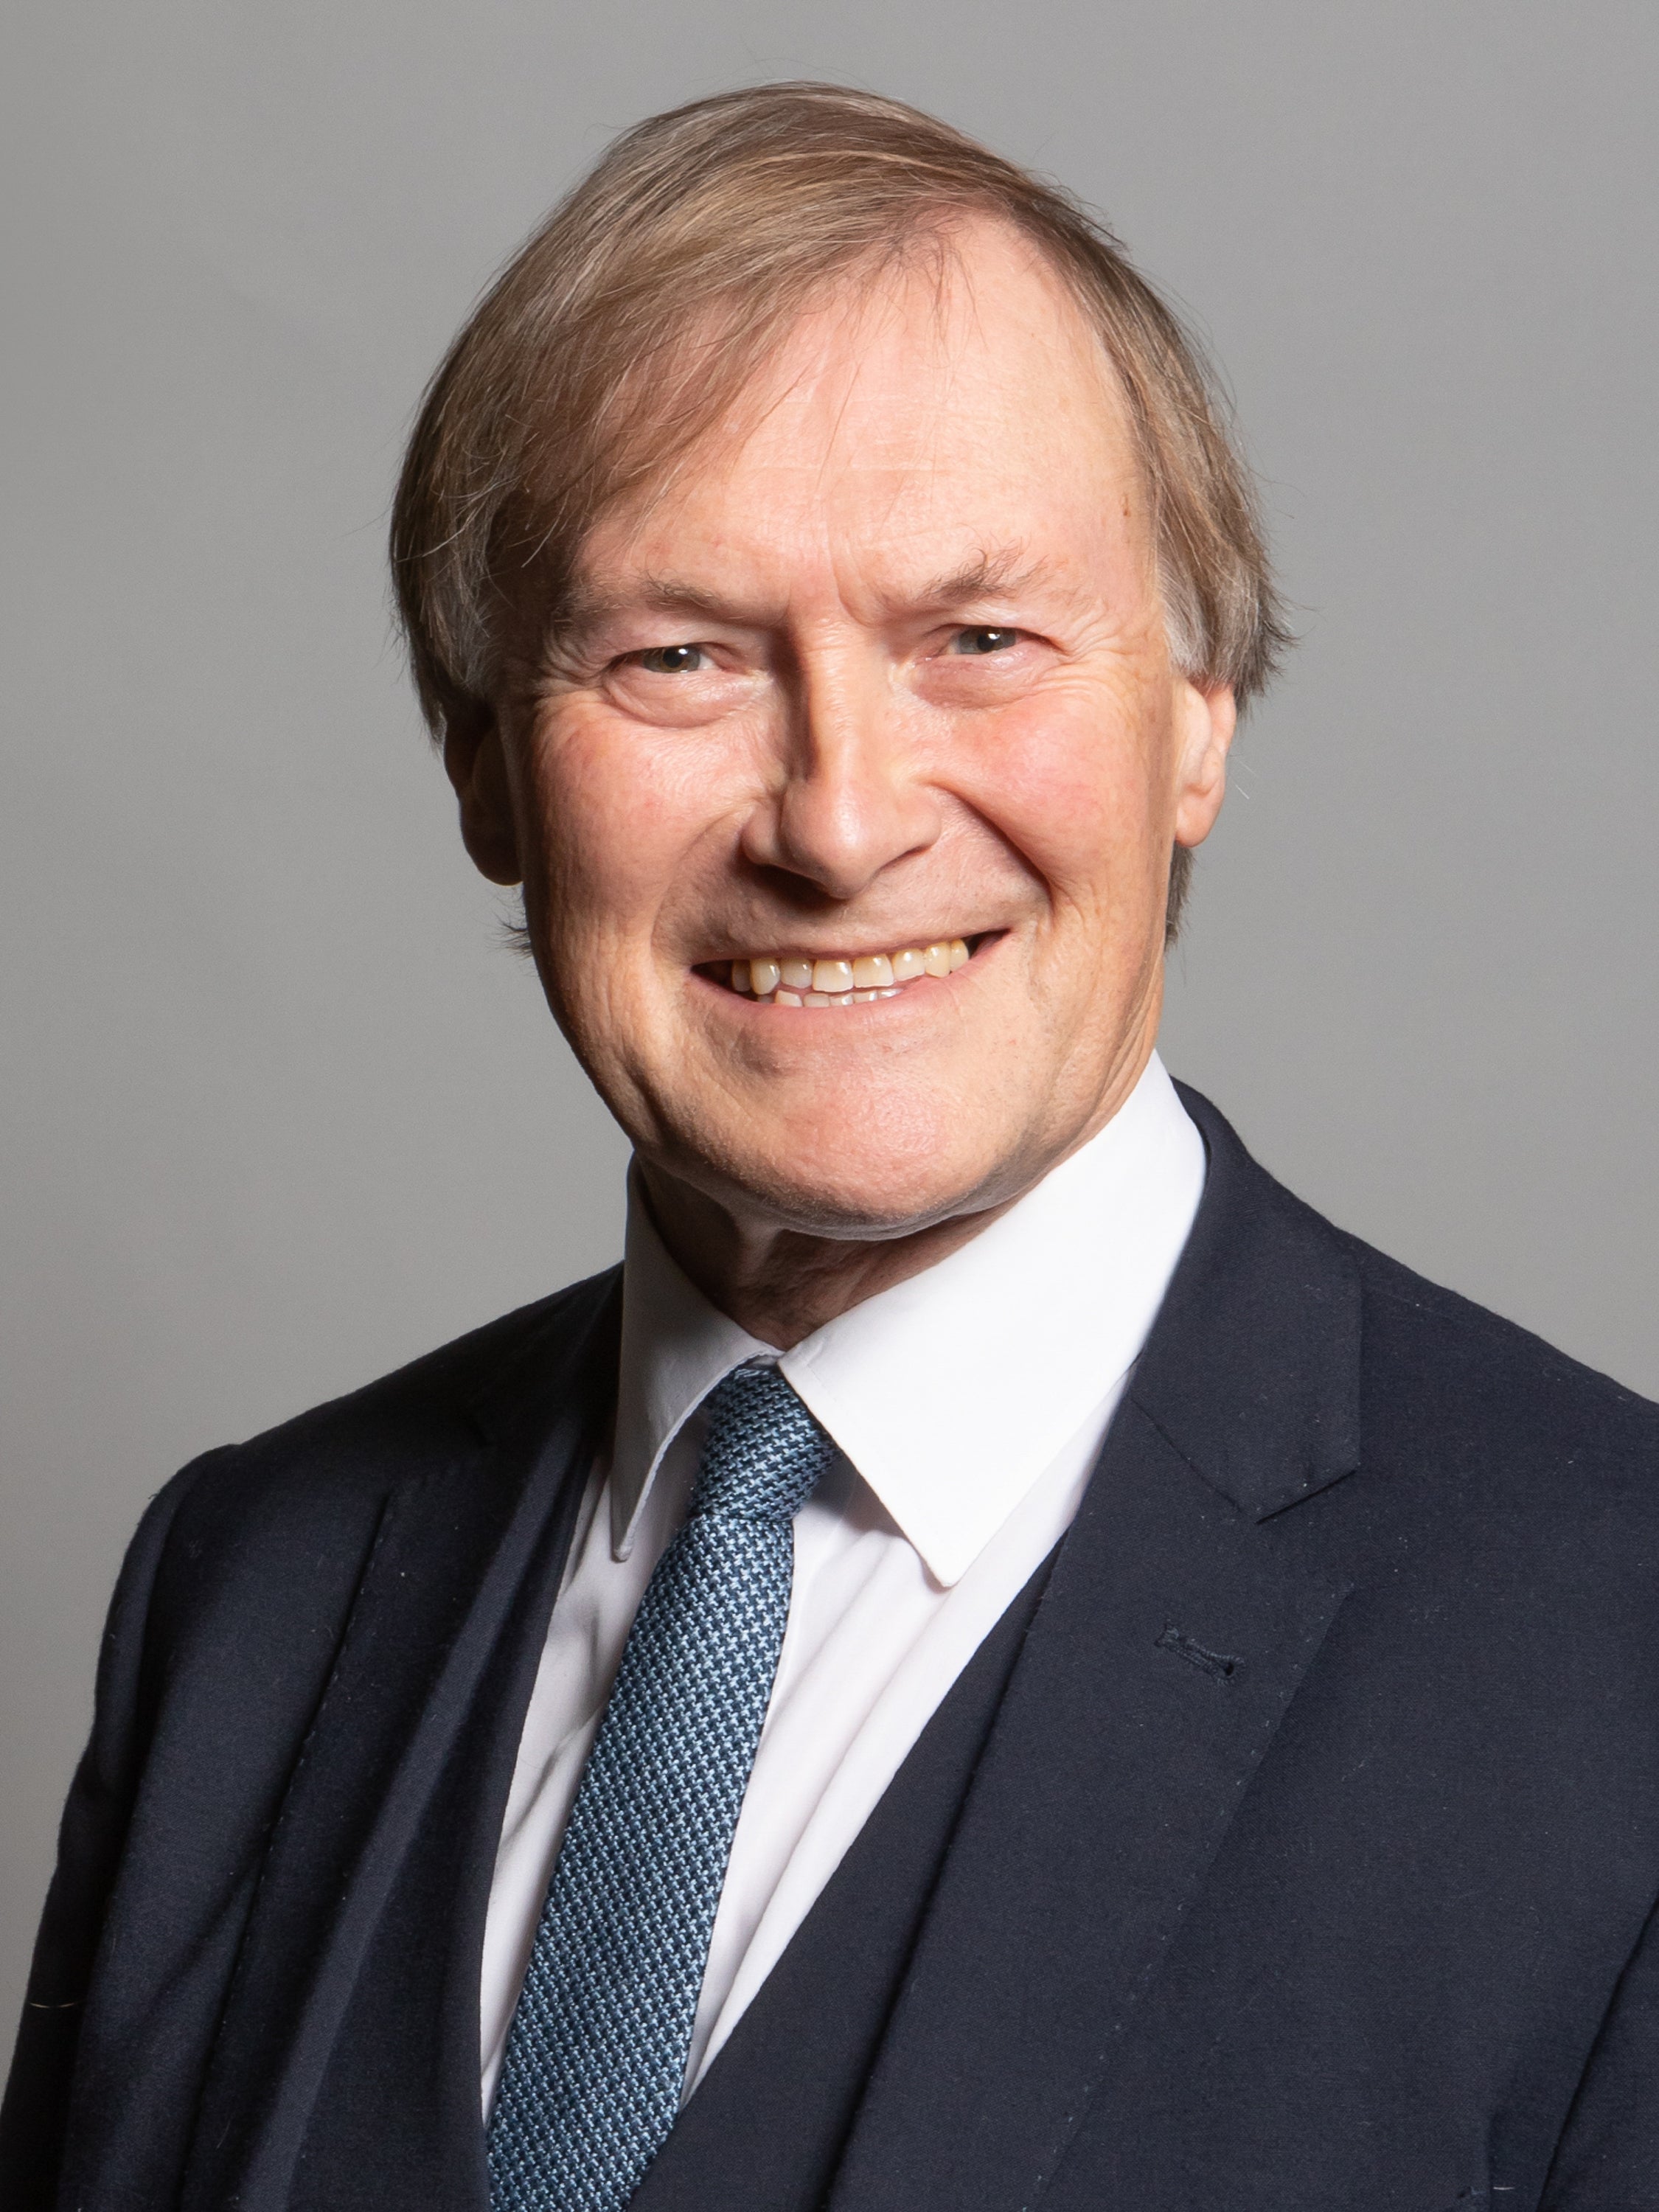 Sir David Amess was stabbed to death at Belfairs Methodist Church in October 2021 (Chris McAndrew/PA)